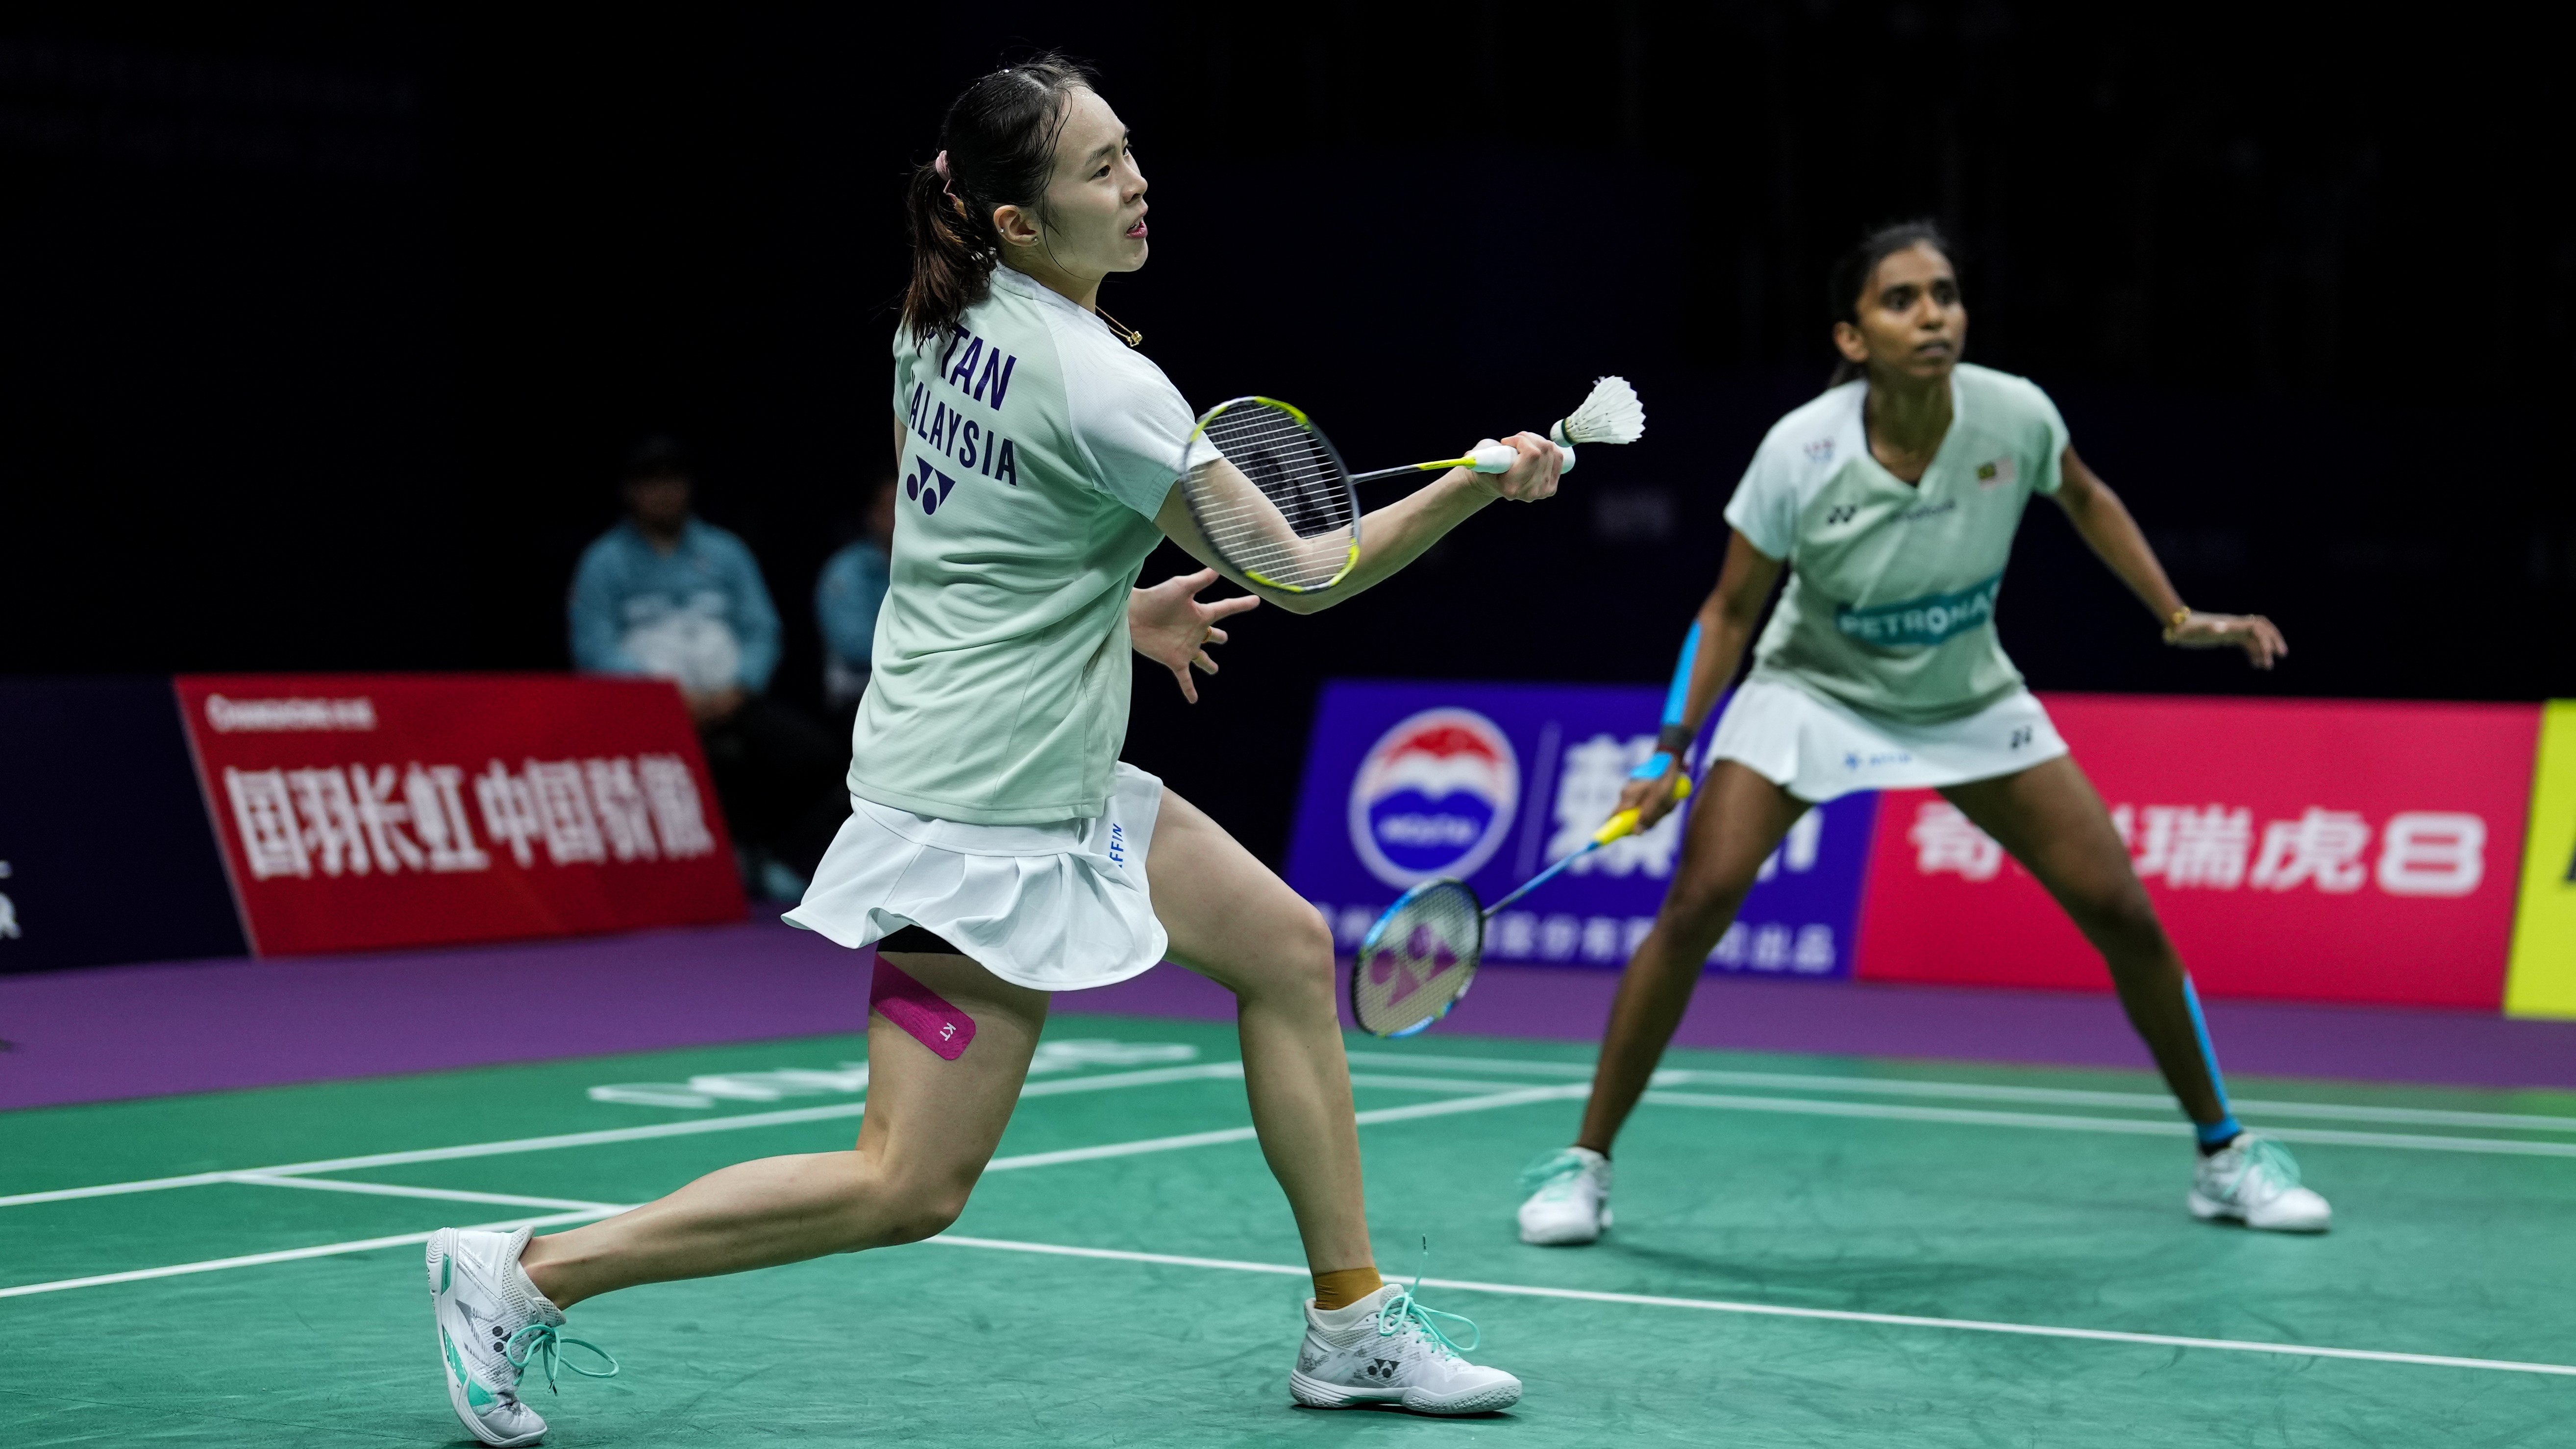 Watch World Record-setting Badminton rally of 211 shots! What to Watch